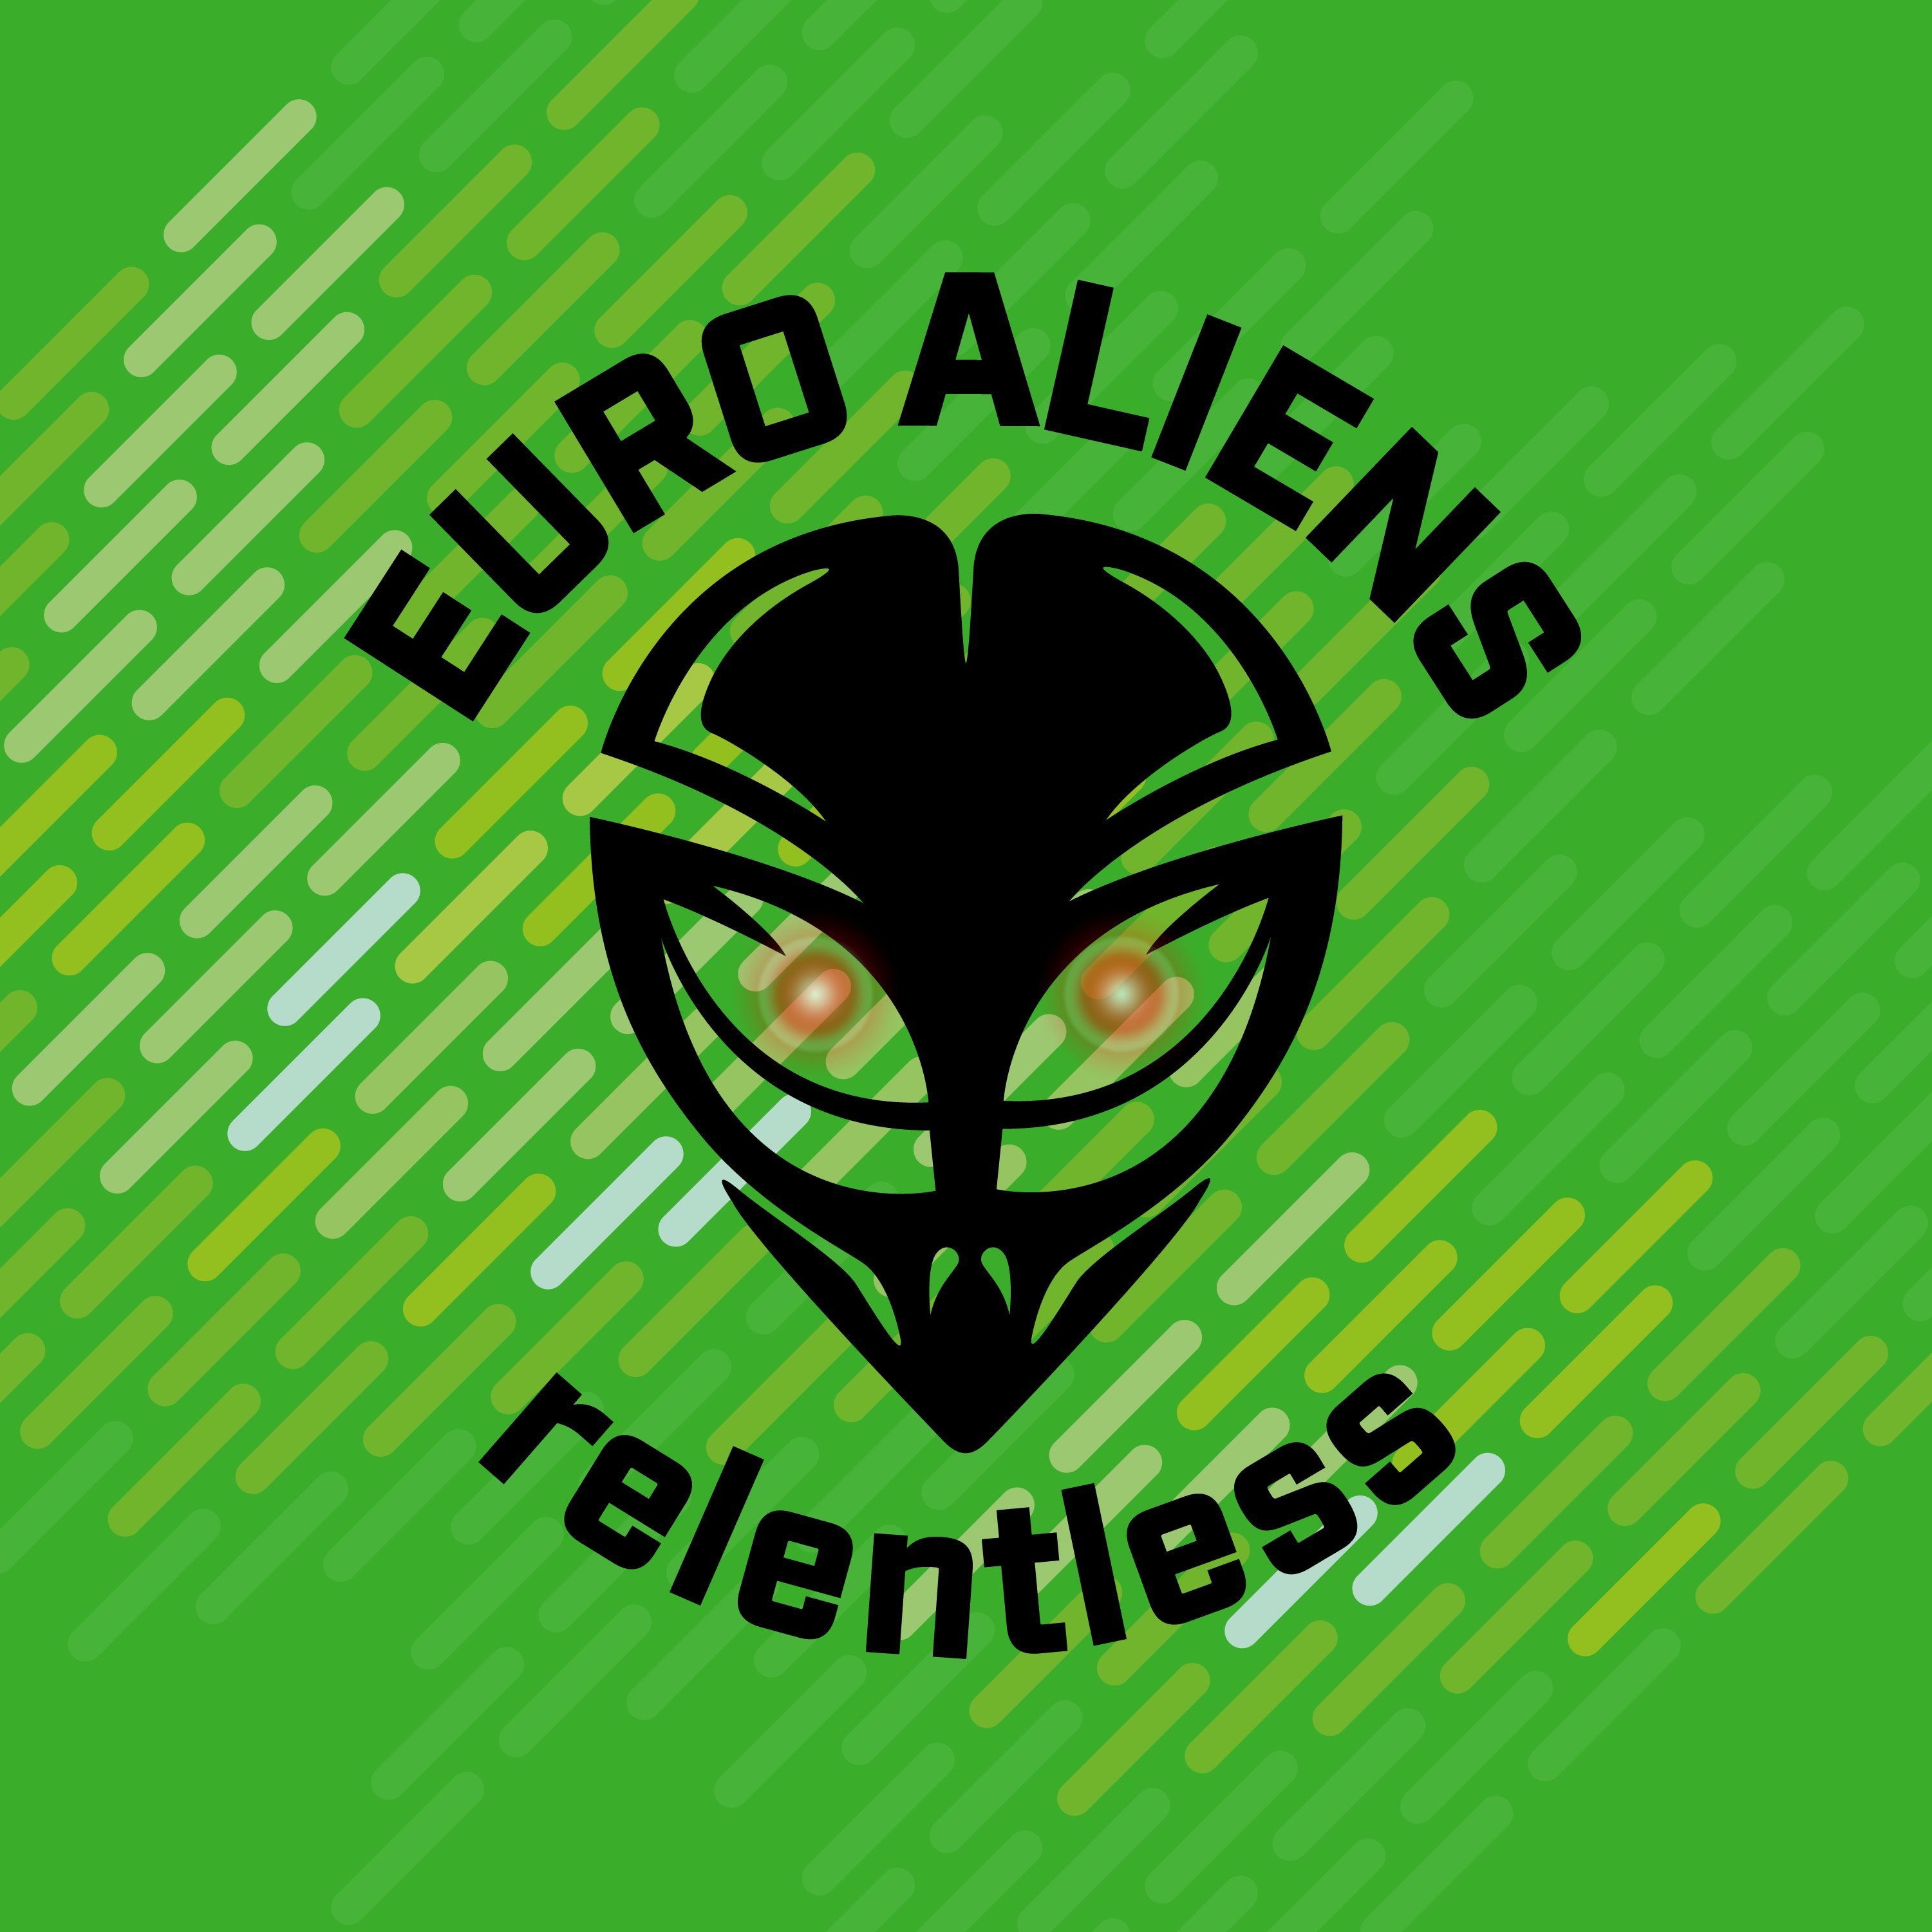 Club Image for EURO ALIENS